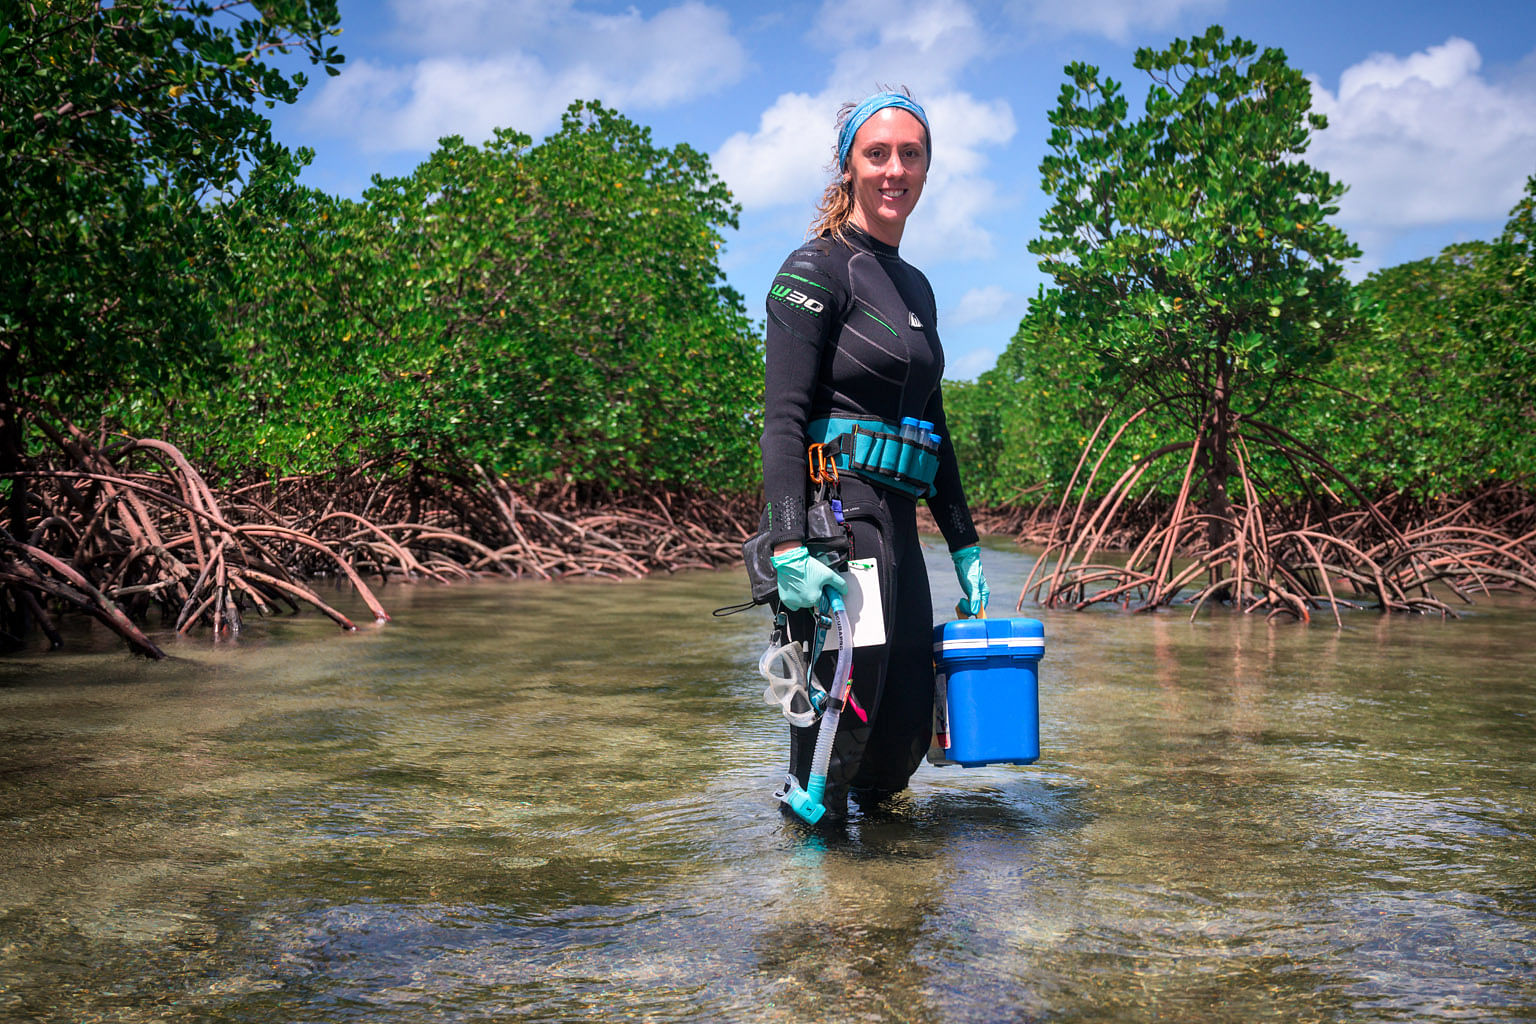 Dr Camp is studying the mangroves, once thought to be unsuitable for corals, at Low Isles. PHOTO: ROLEX/FRANCK GAZZOLA